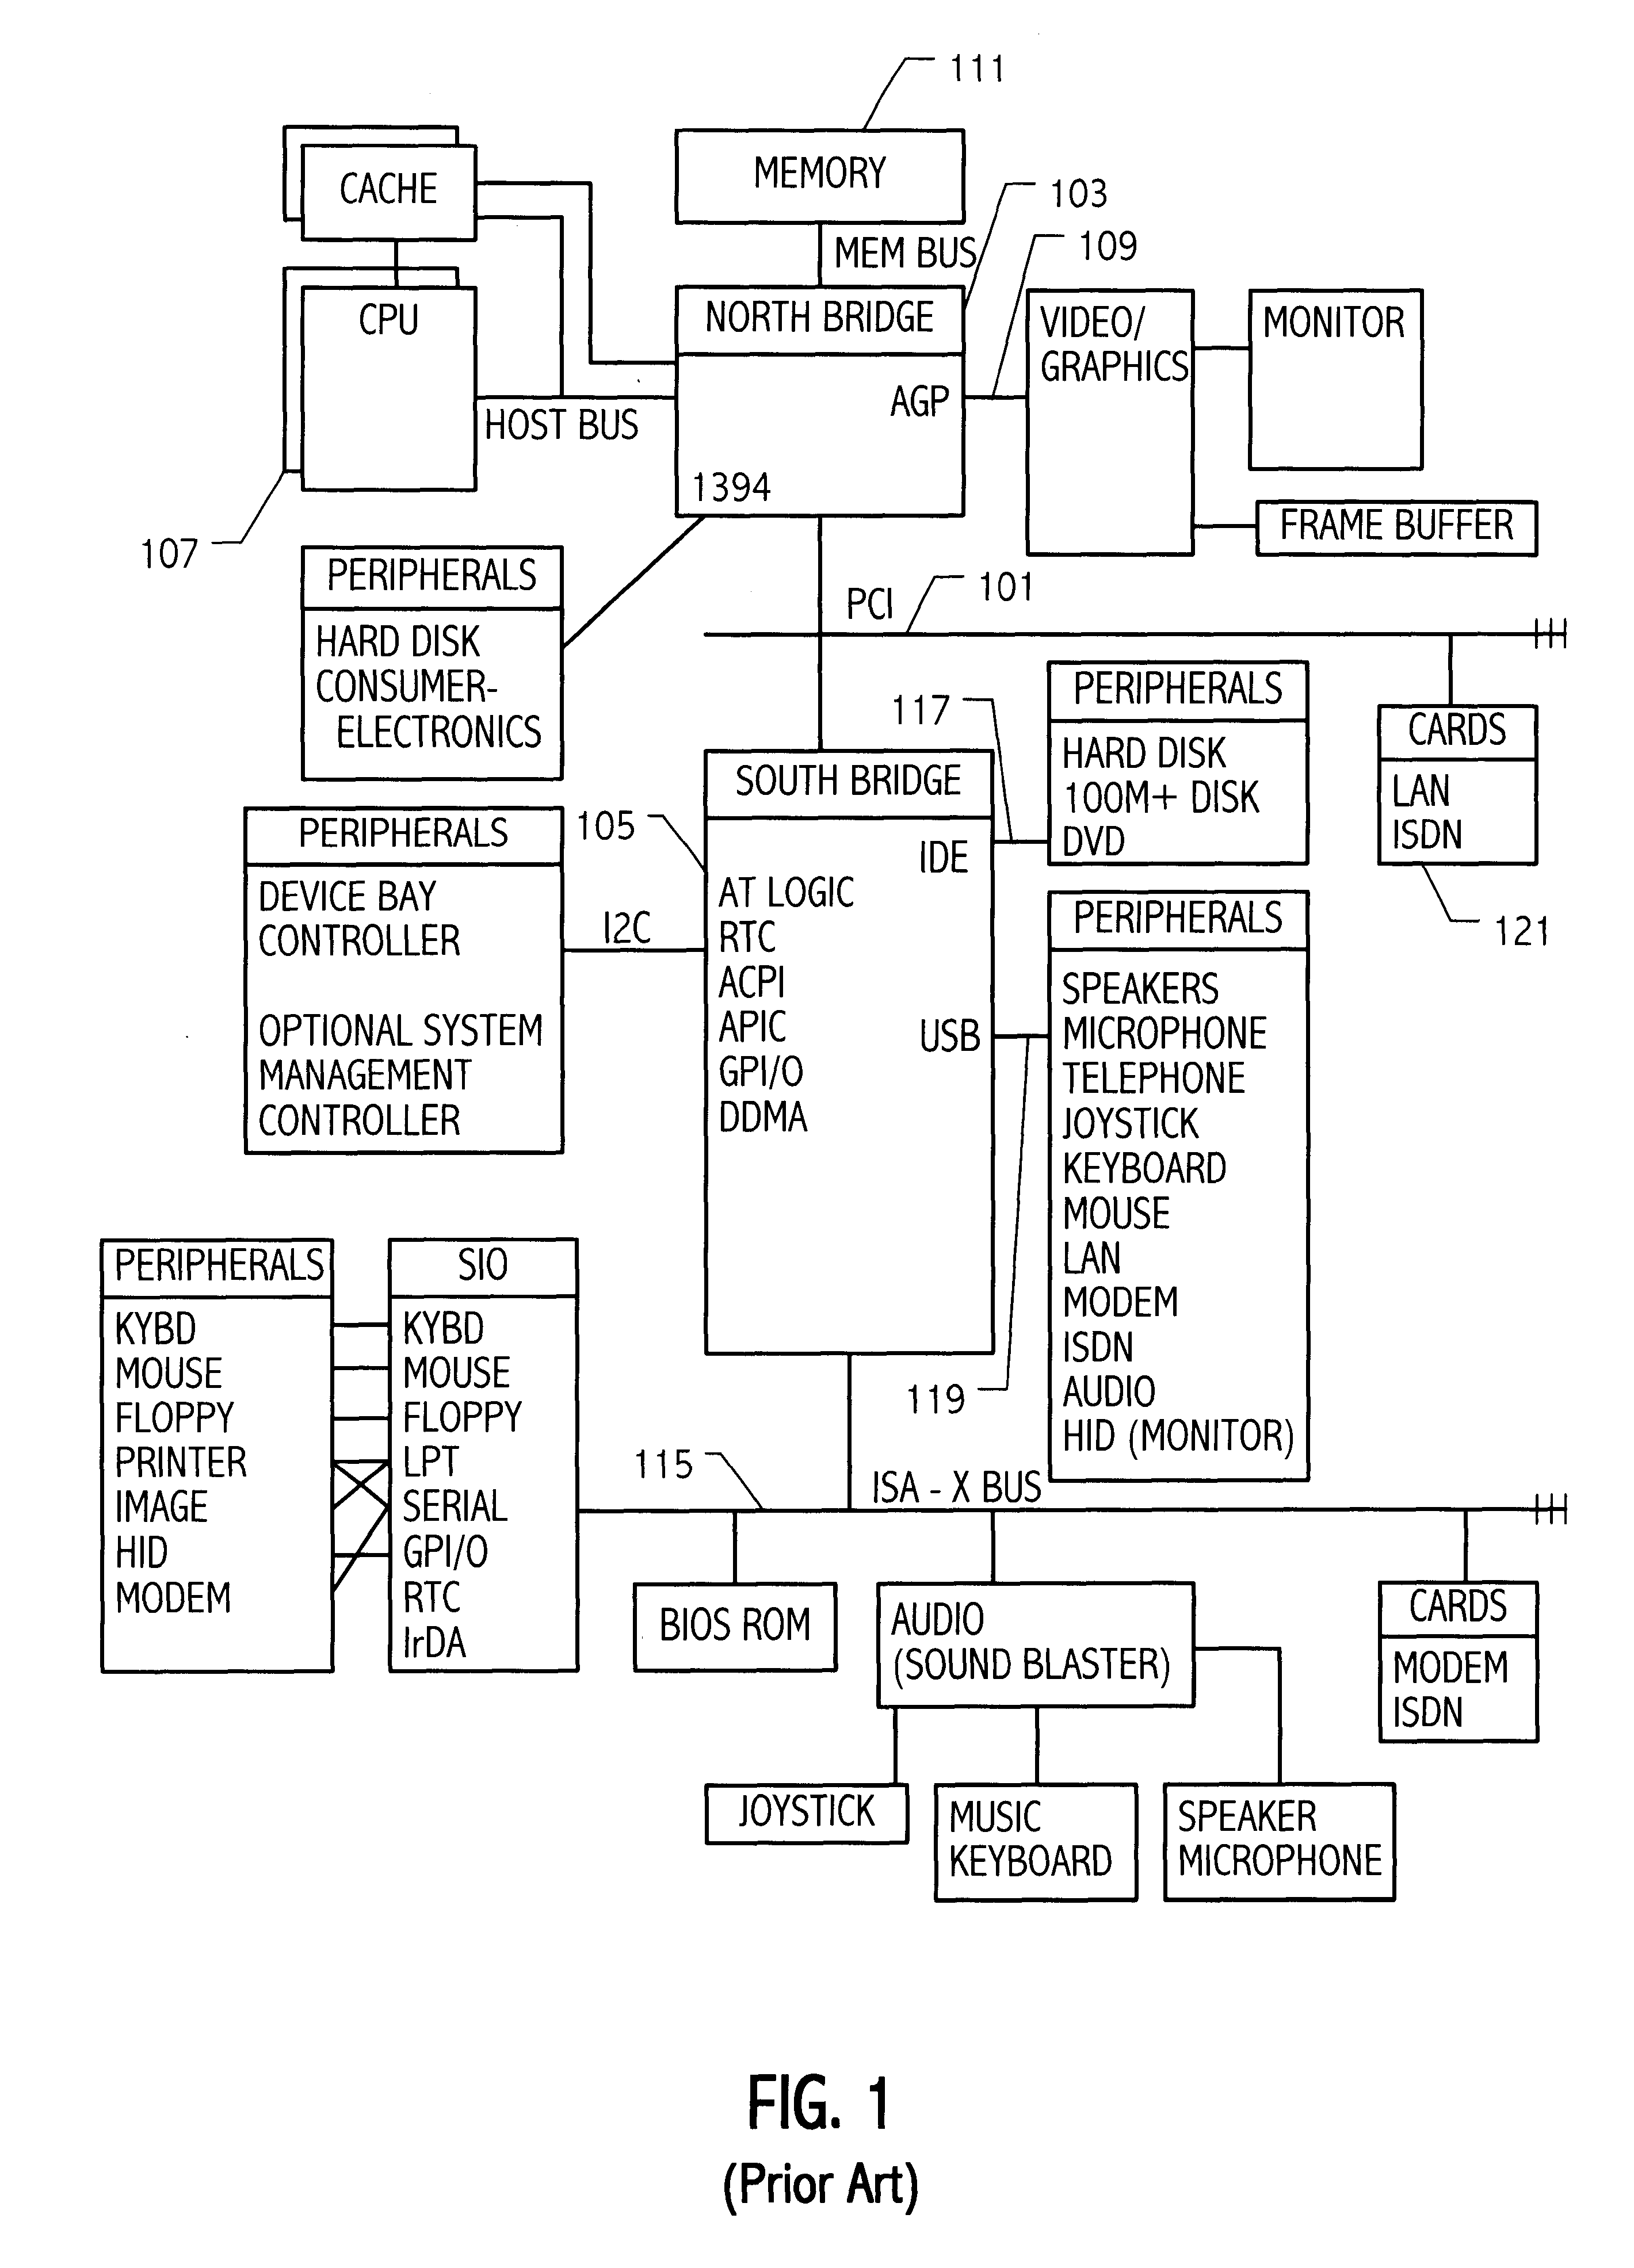 Subordinate bridge structure for a point-to-point computer interconnection bus